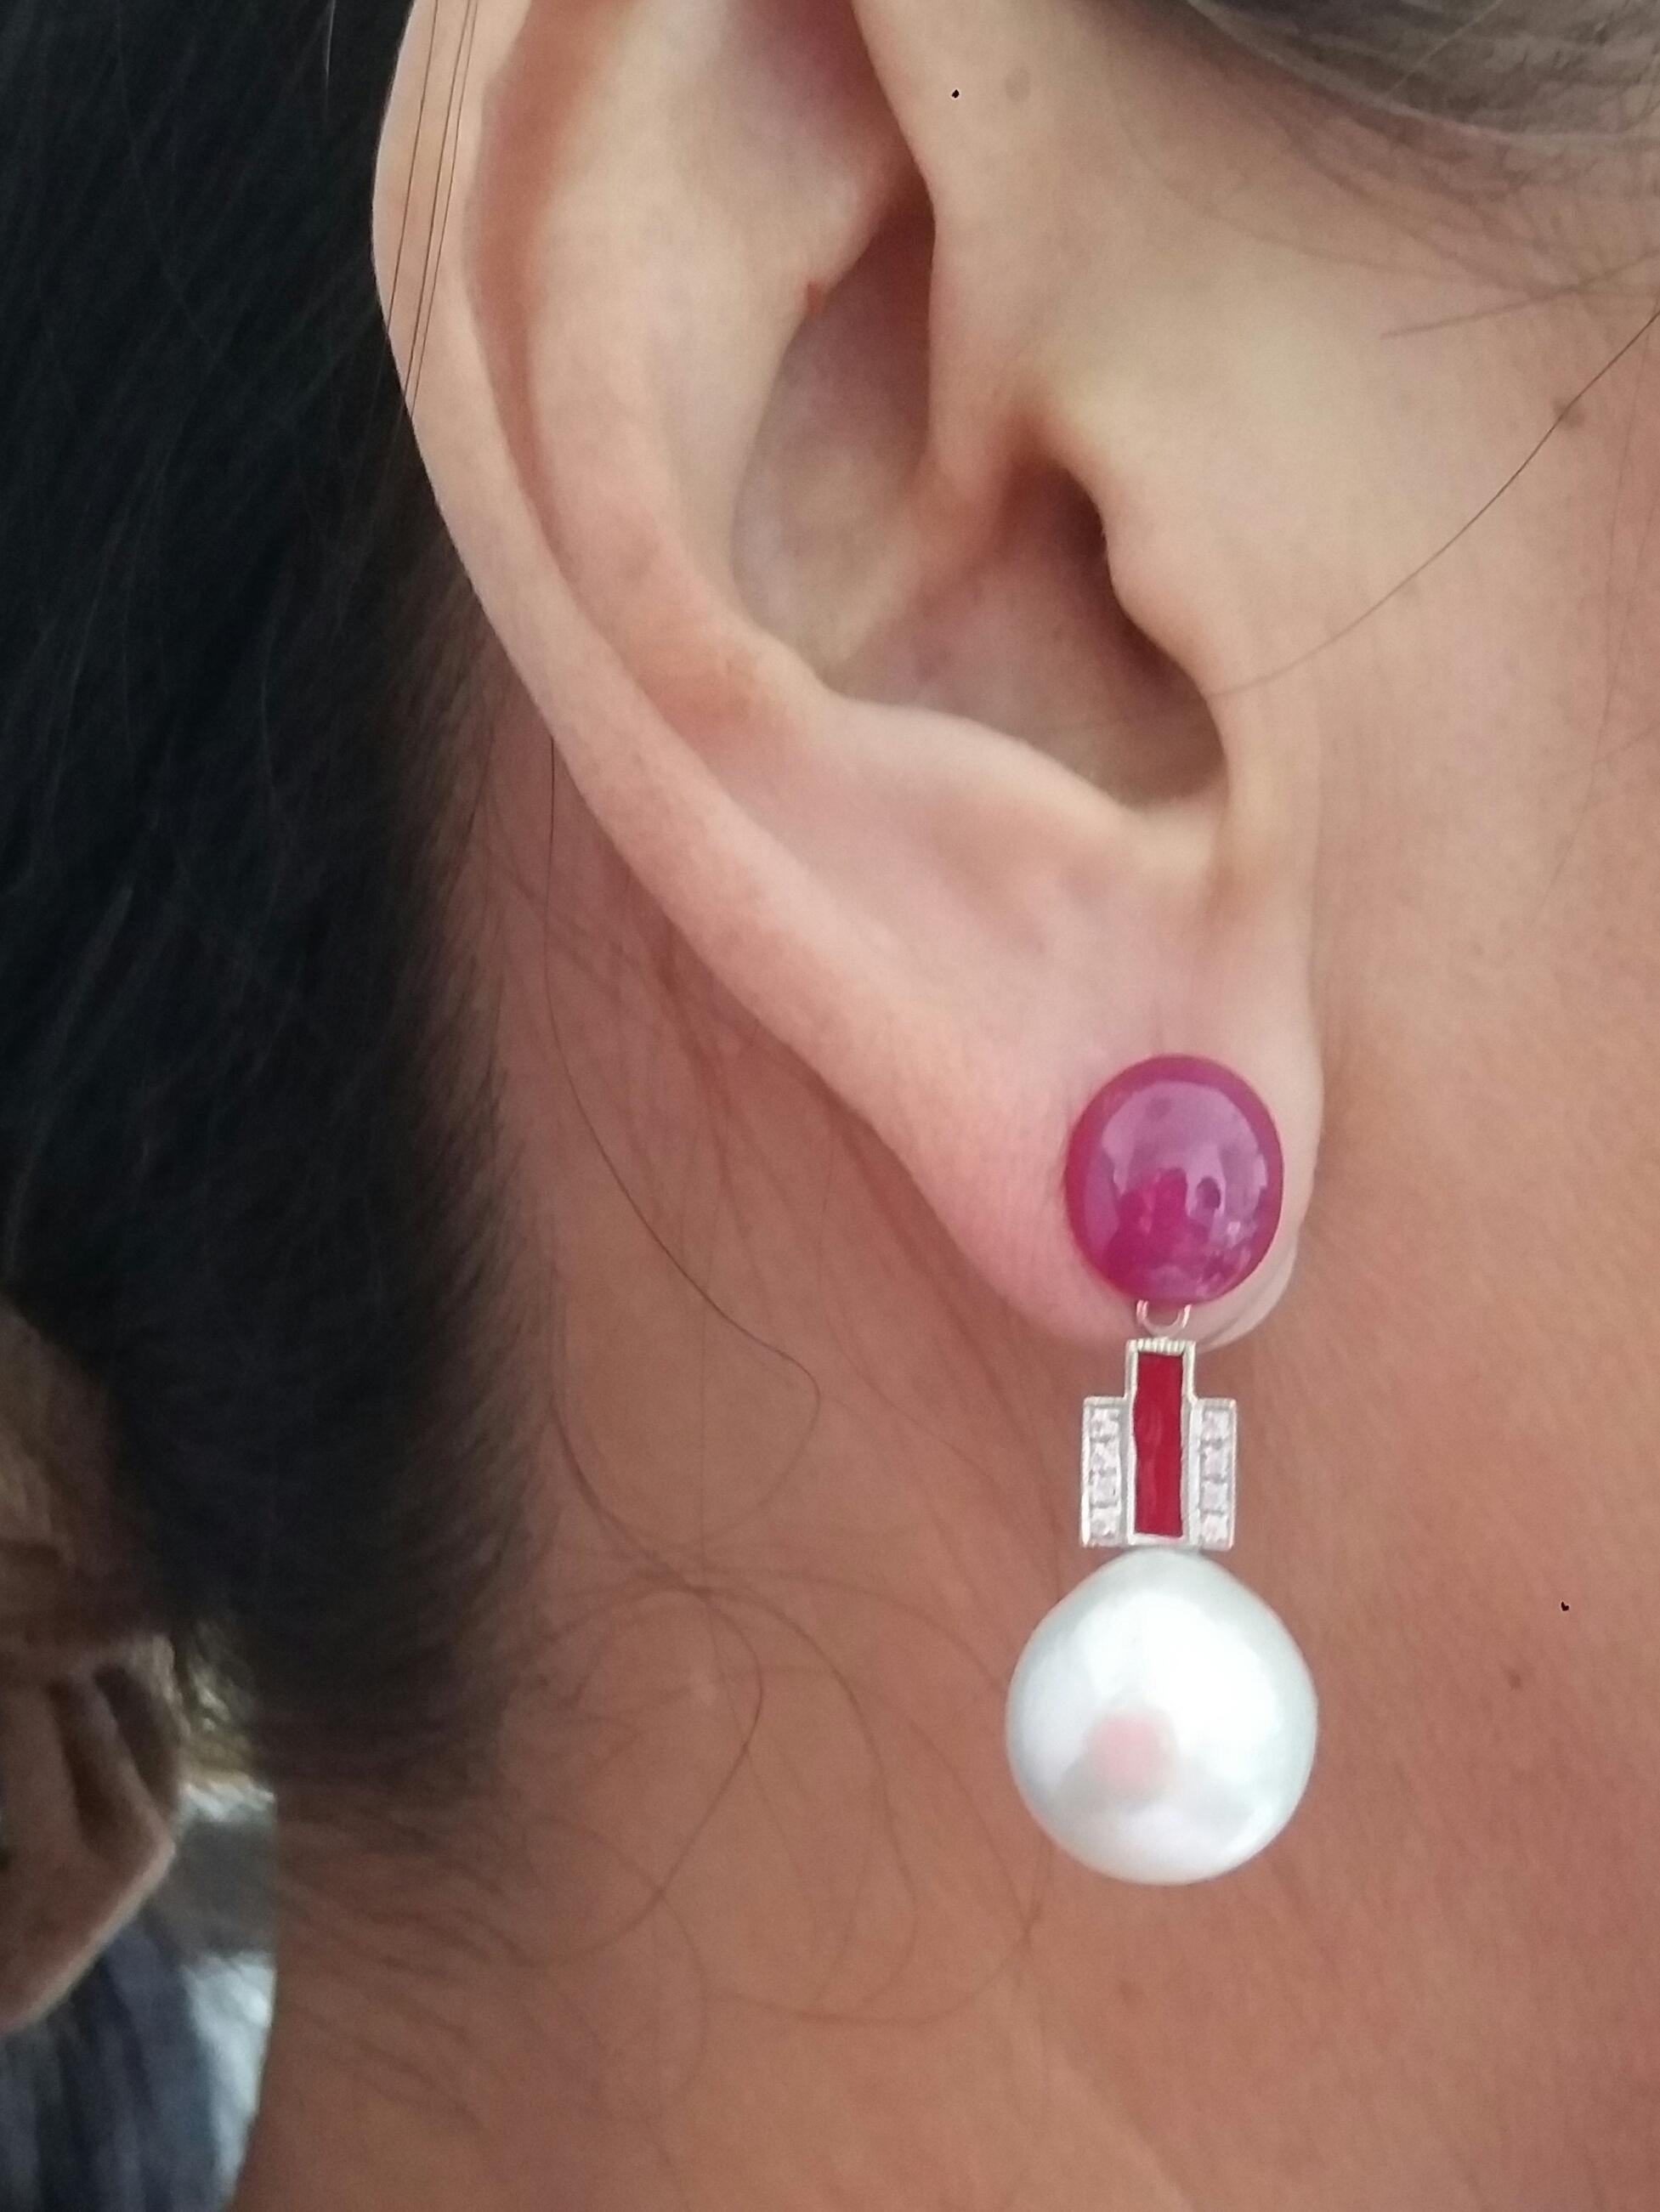 2 large ruby cabochons make up the upper part, the central part is white gold diamonds and  red enamels, the lower part is composed of 2 white baroque pearls 13 mm in diameter.
In 1978 our workshop started in Italy to make simple-chic Art Deco style